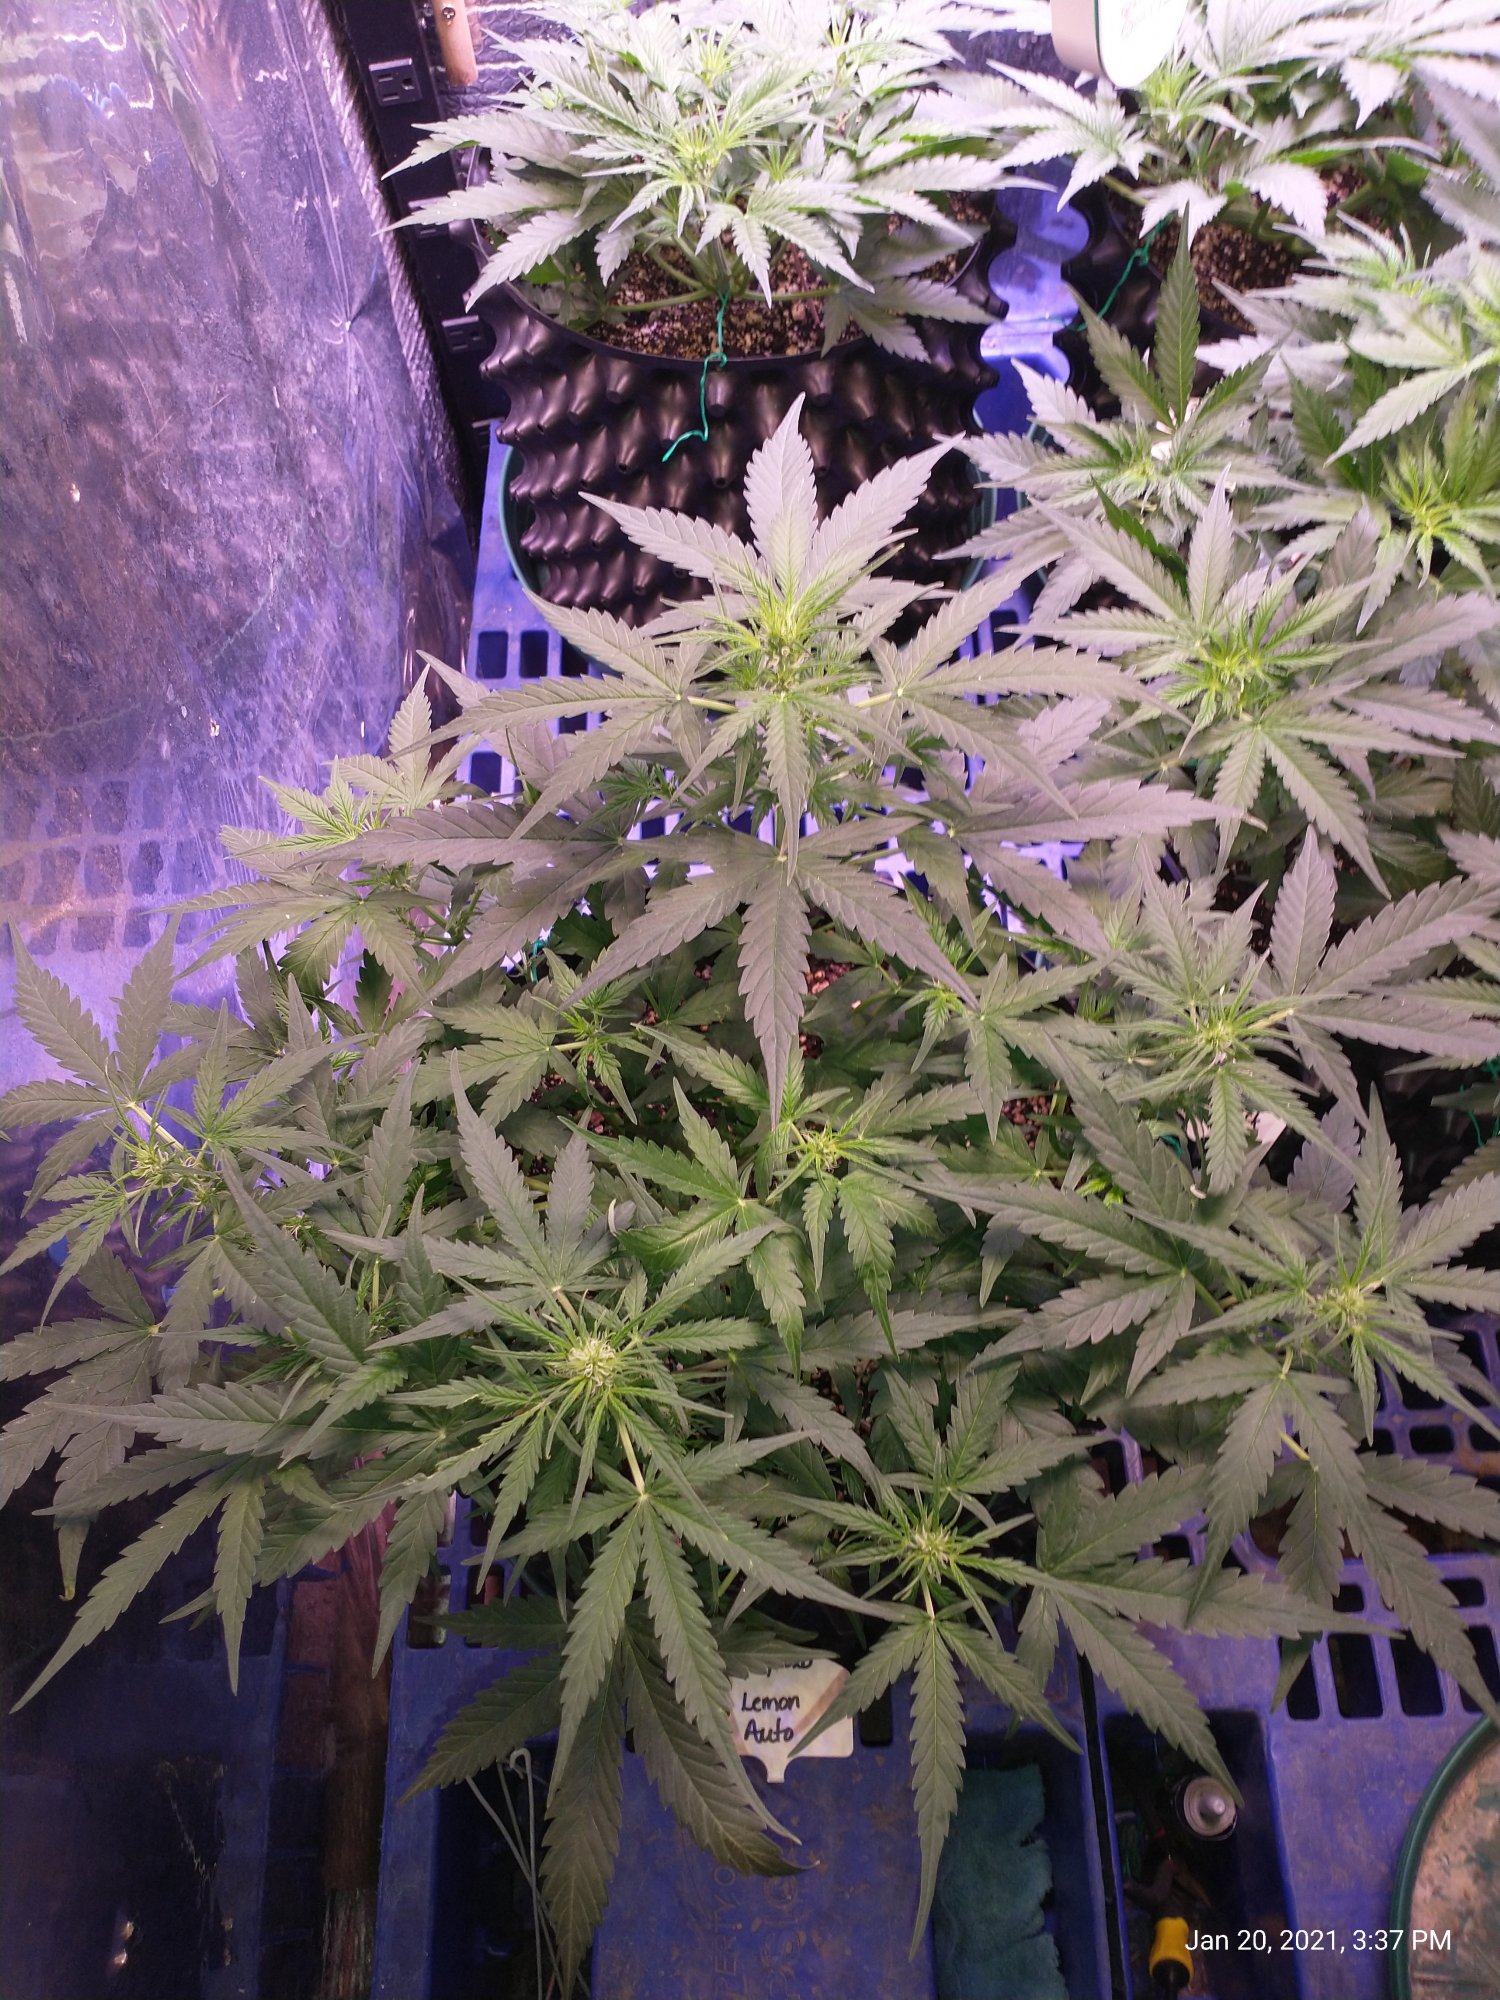 Lemon auto started flowering early in week 3 its in week 5 now lot of growth for 2 weeks 2